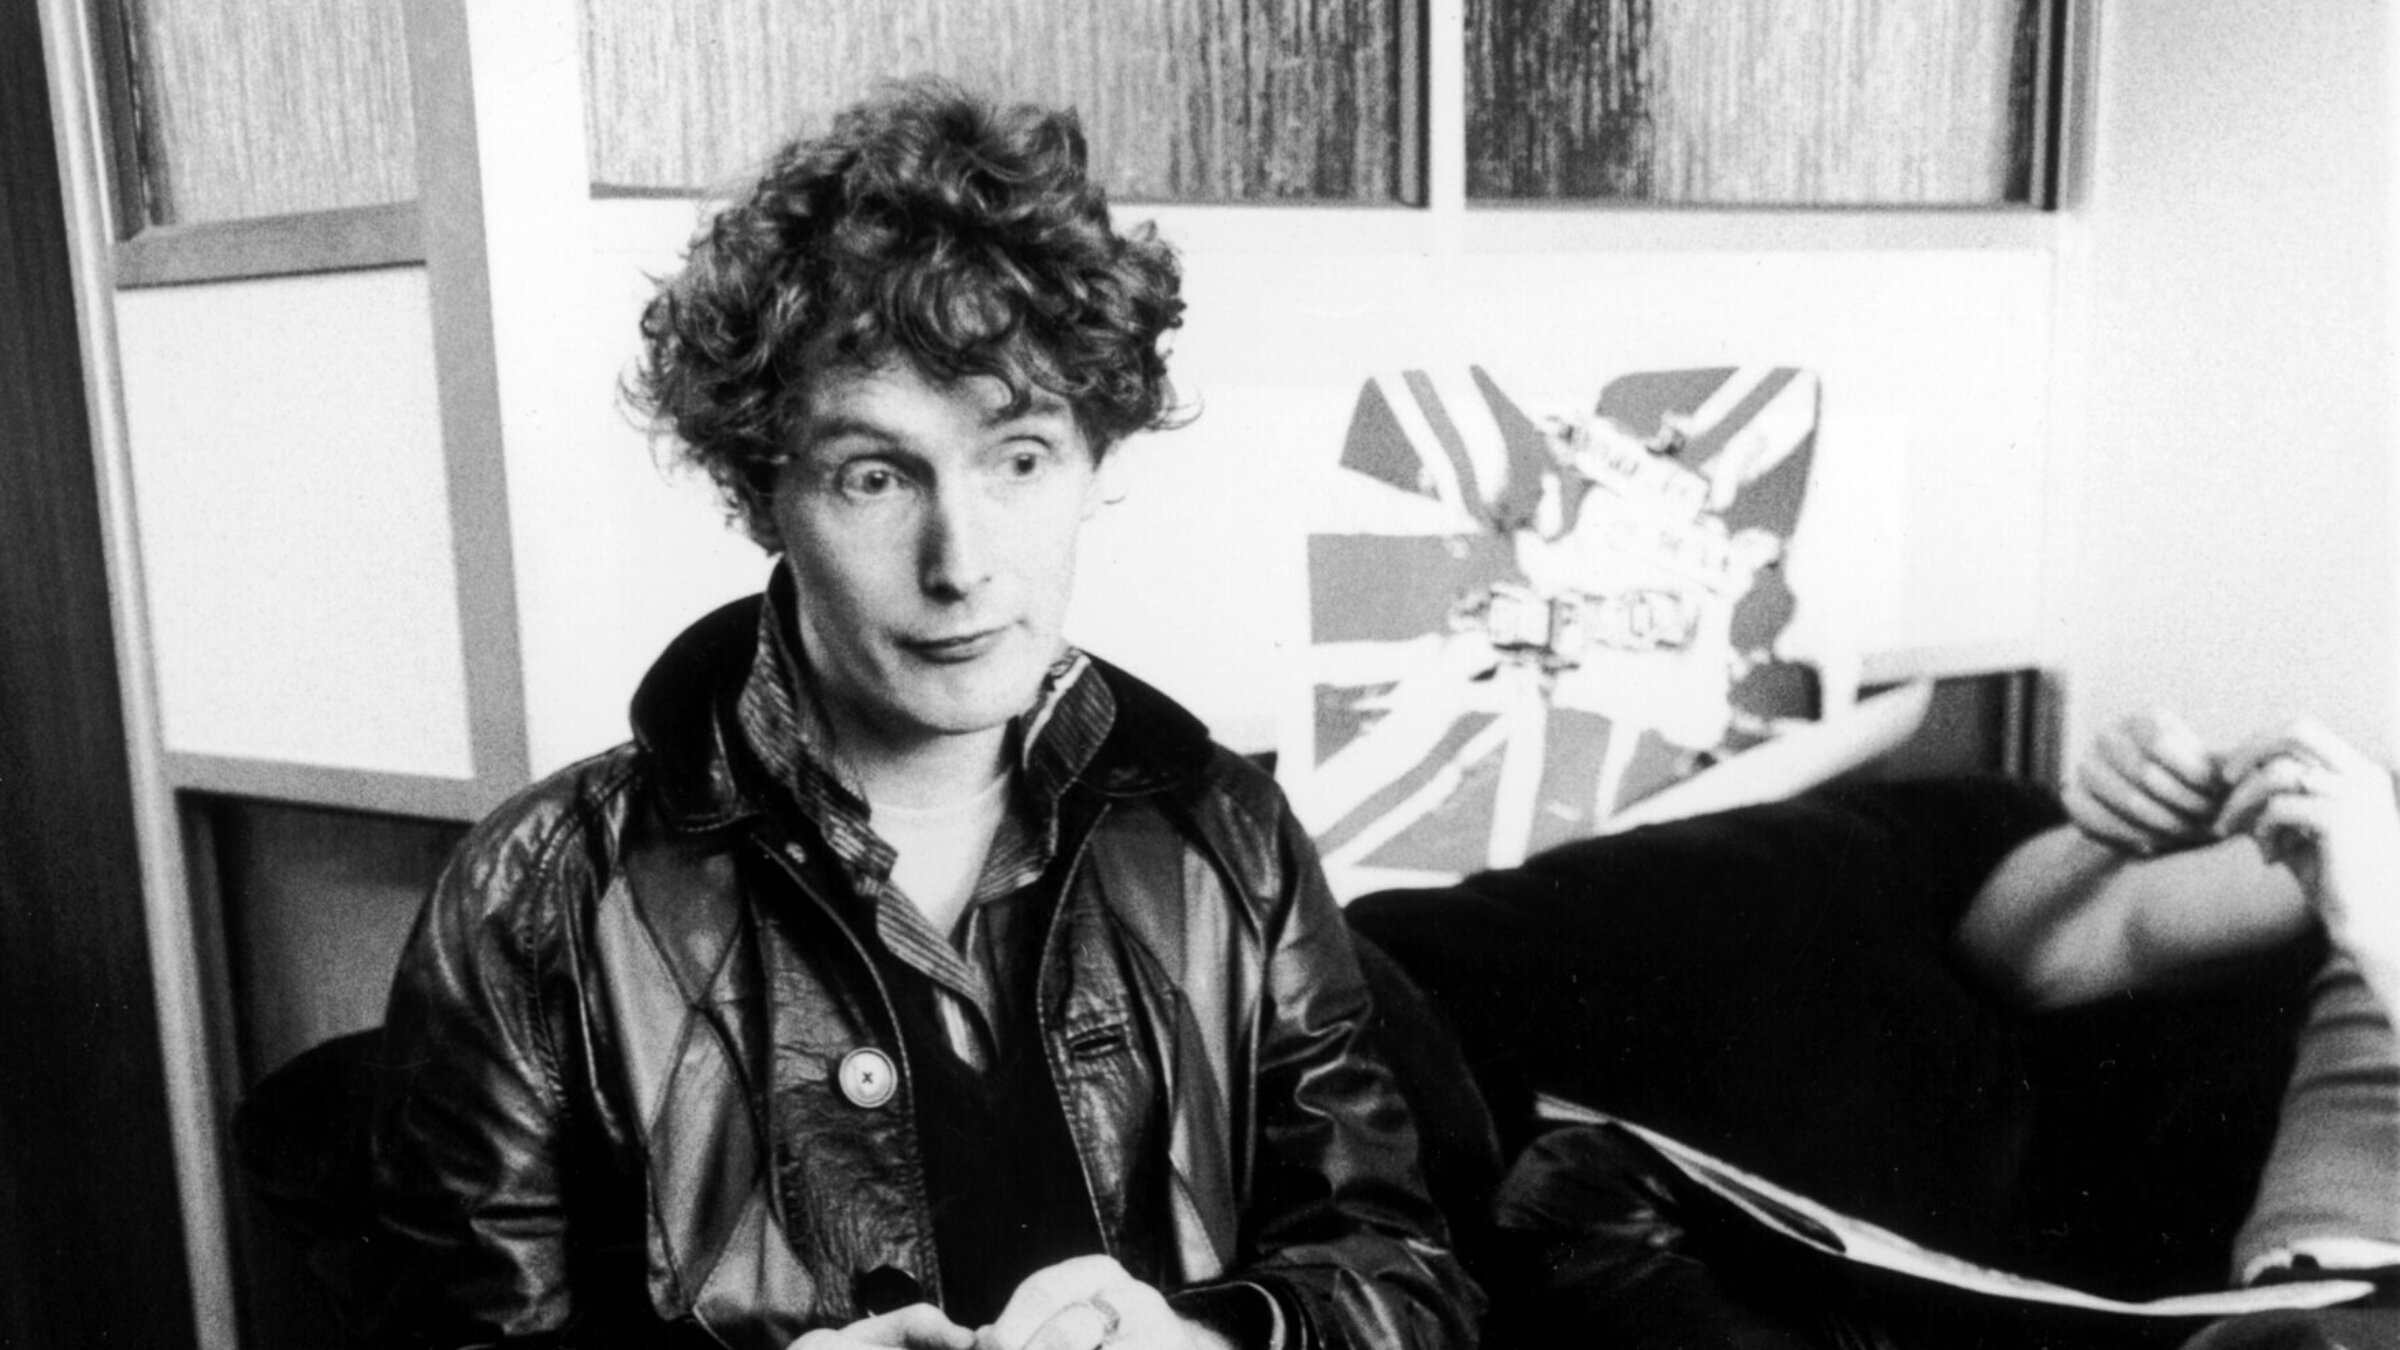 Malcolm McLaren, seen during the time when he managed the Sex Pistols.